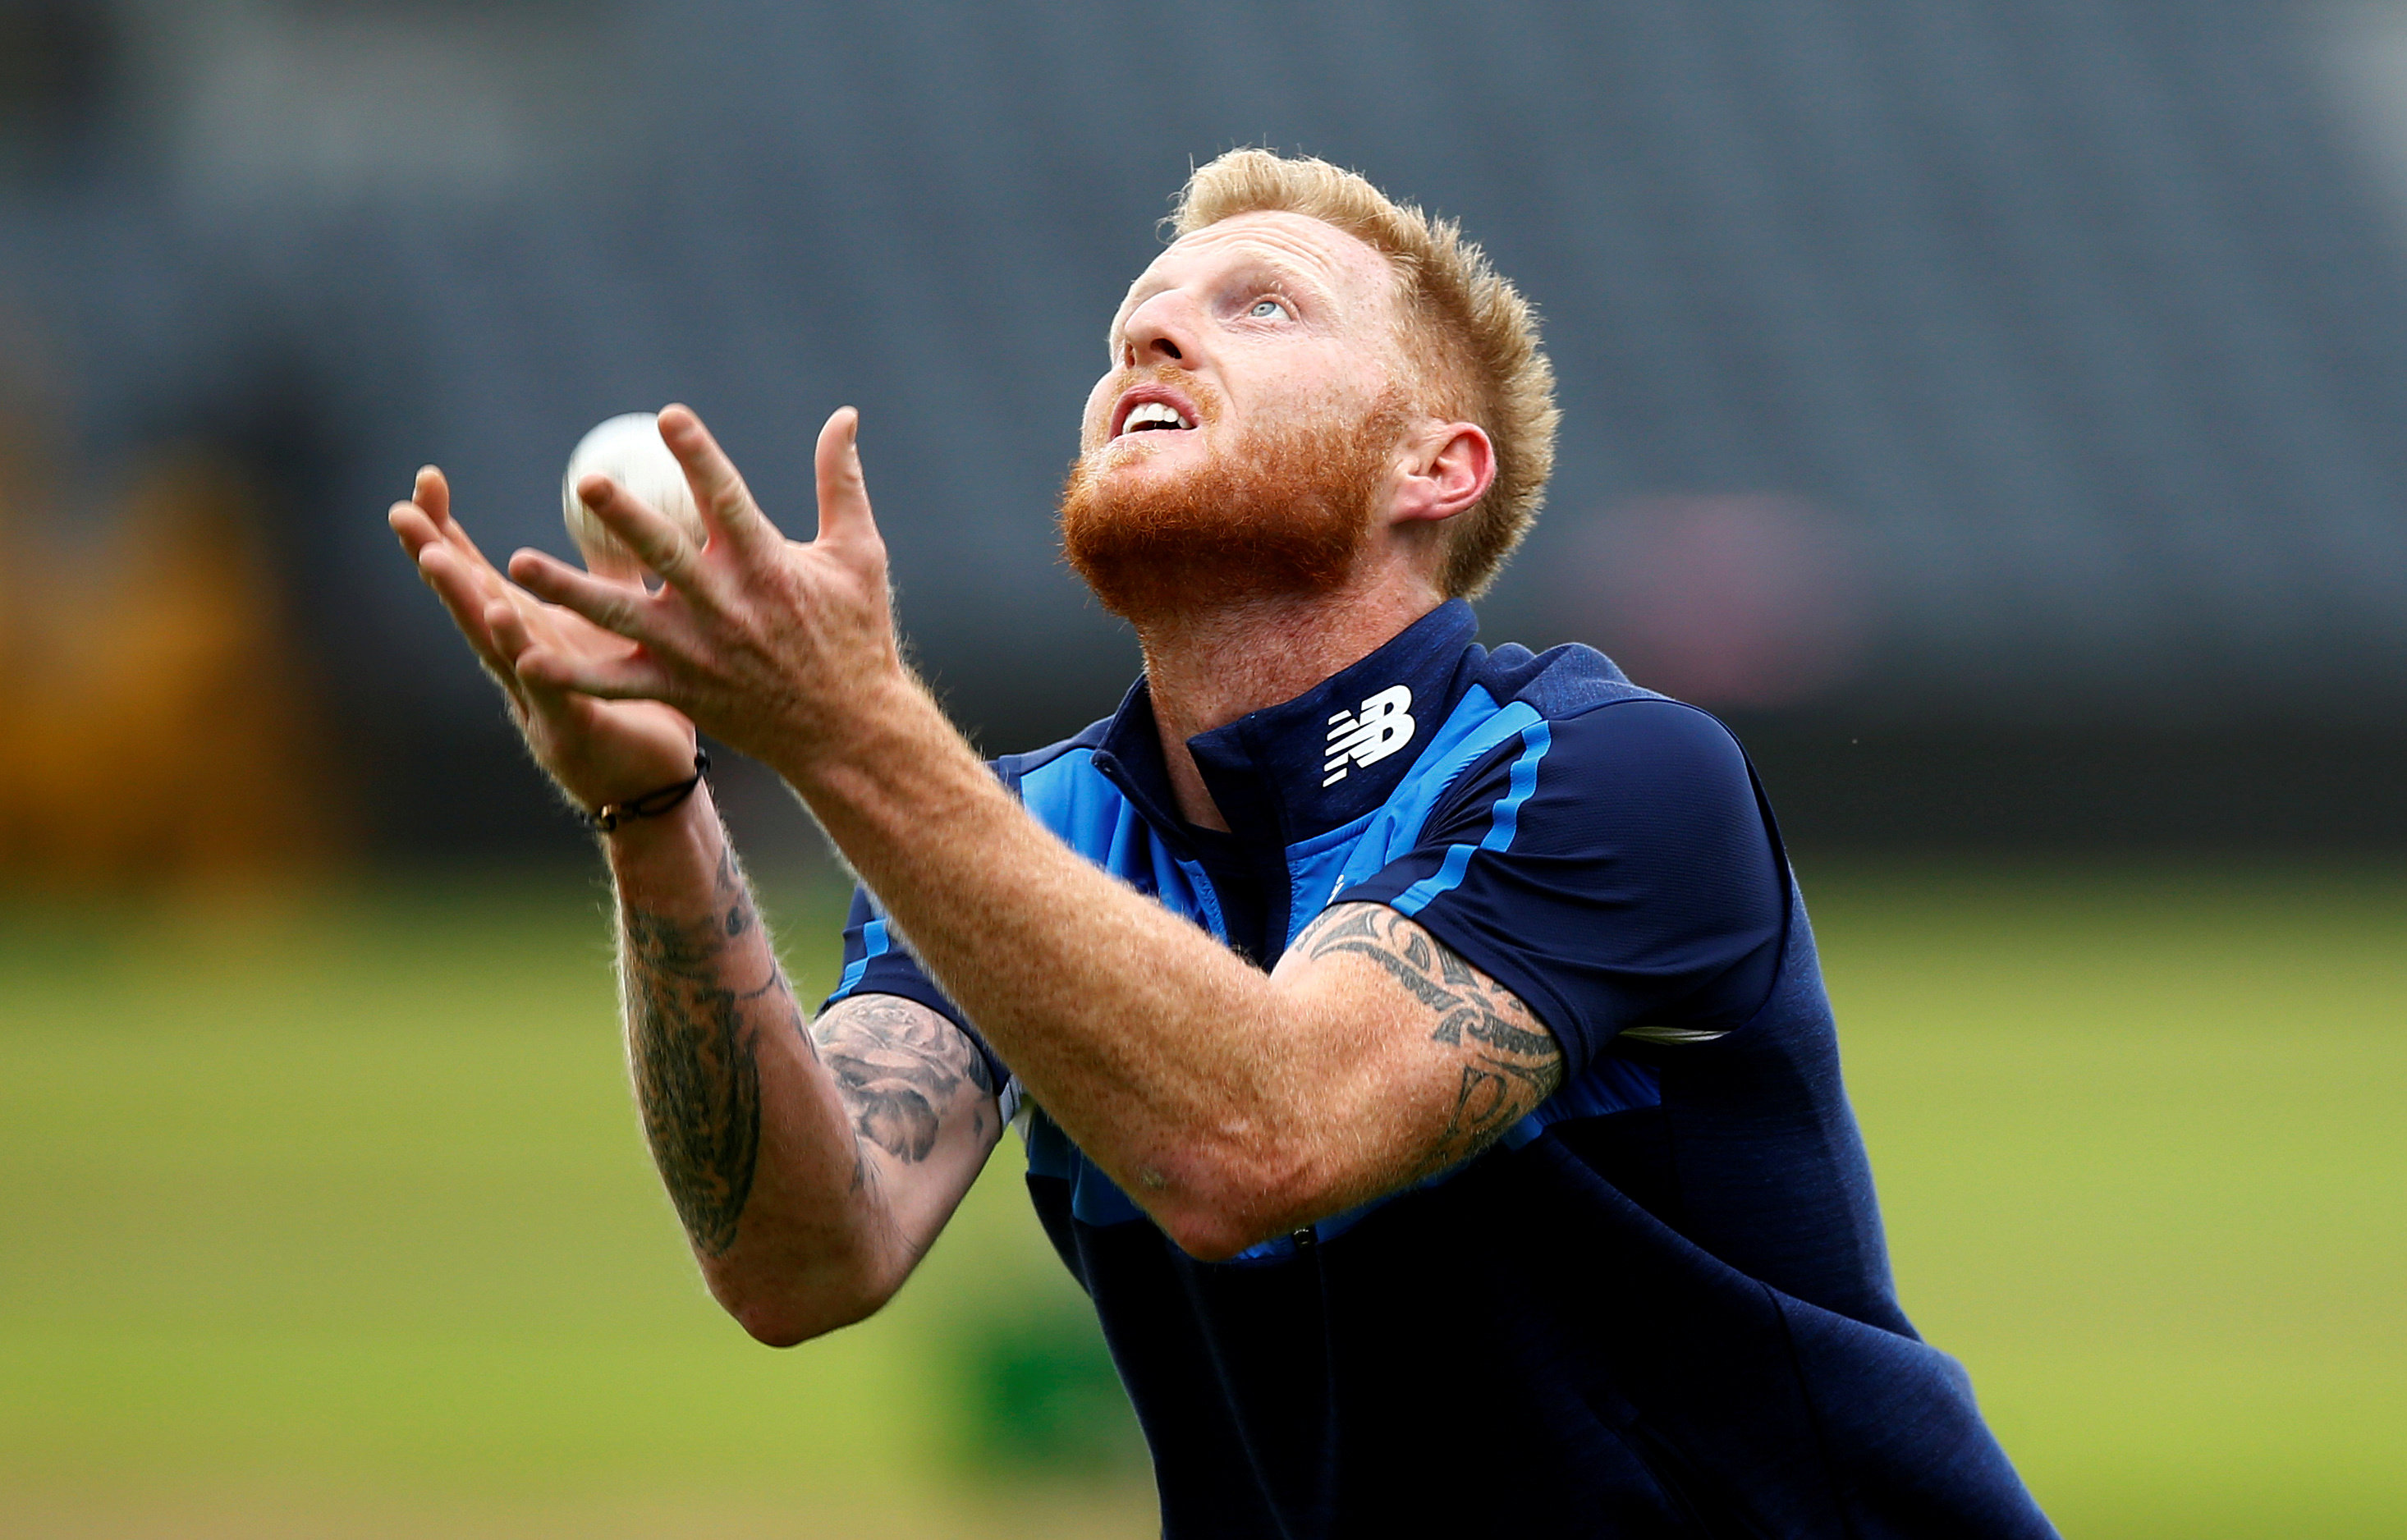 Cricket: England's fragile top order must cope without Stokes